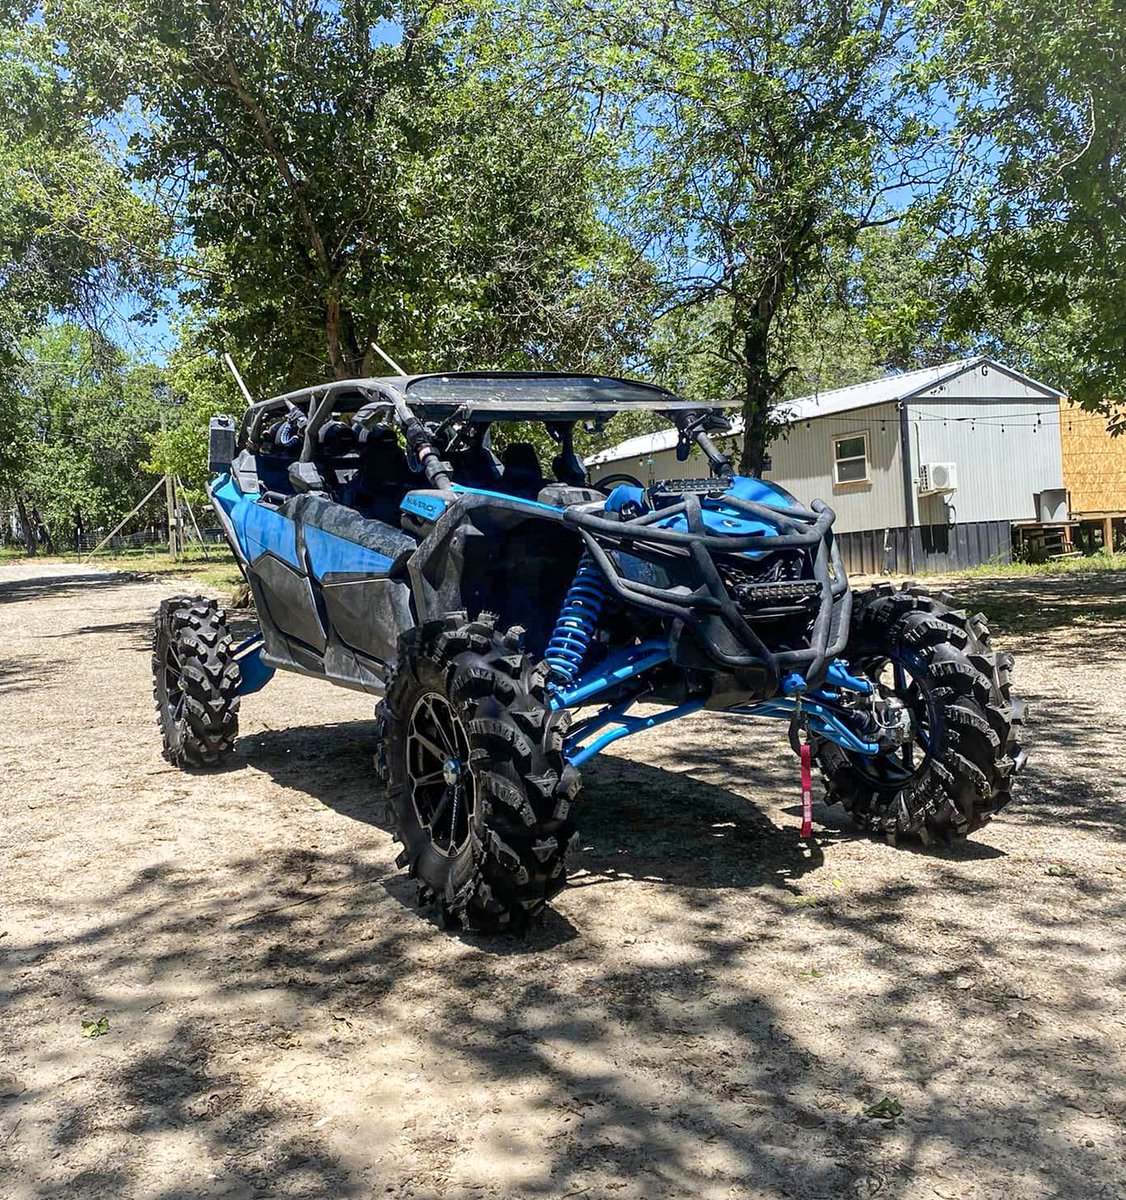 🔥 This #MaverickX3 came out of
@stxpowersportsllc on an #SuperATV 6' lift kit,
#RhinoAxles, and 36' #IntimidatorTires ready for any
trails! 💪😎